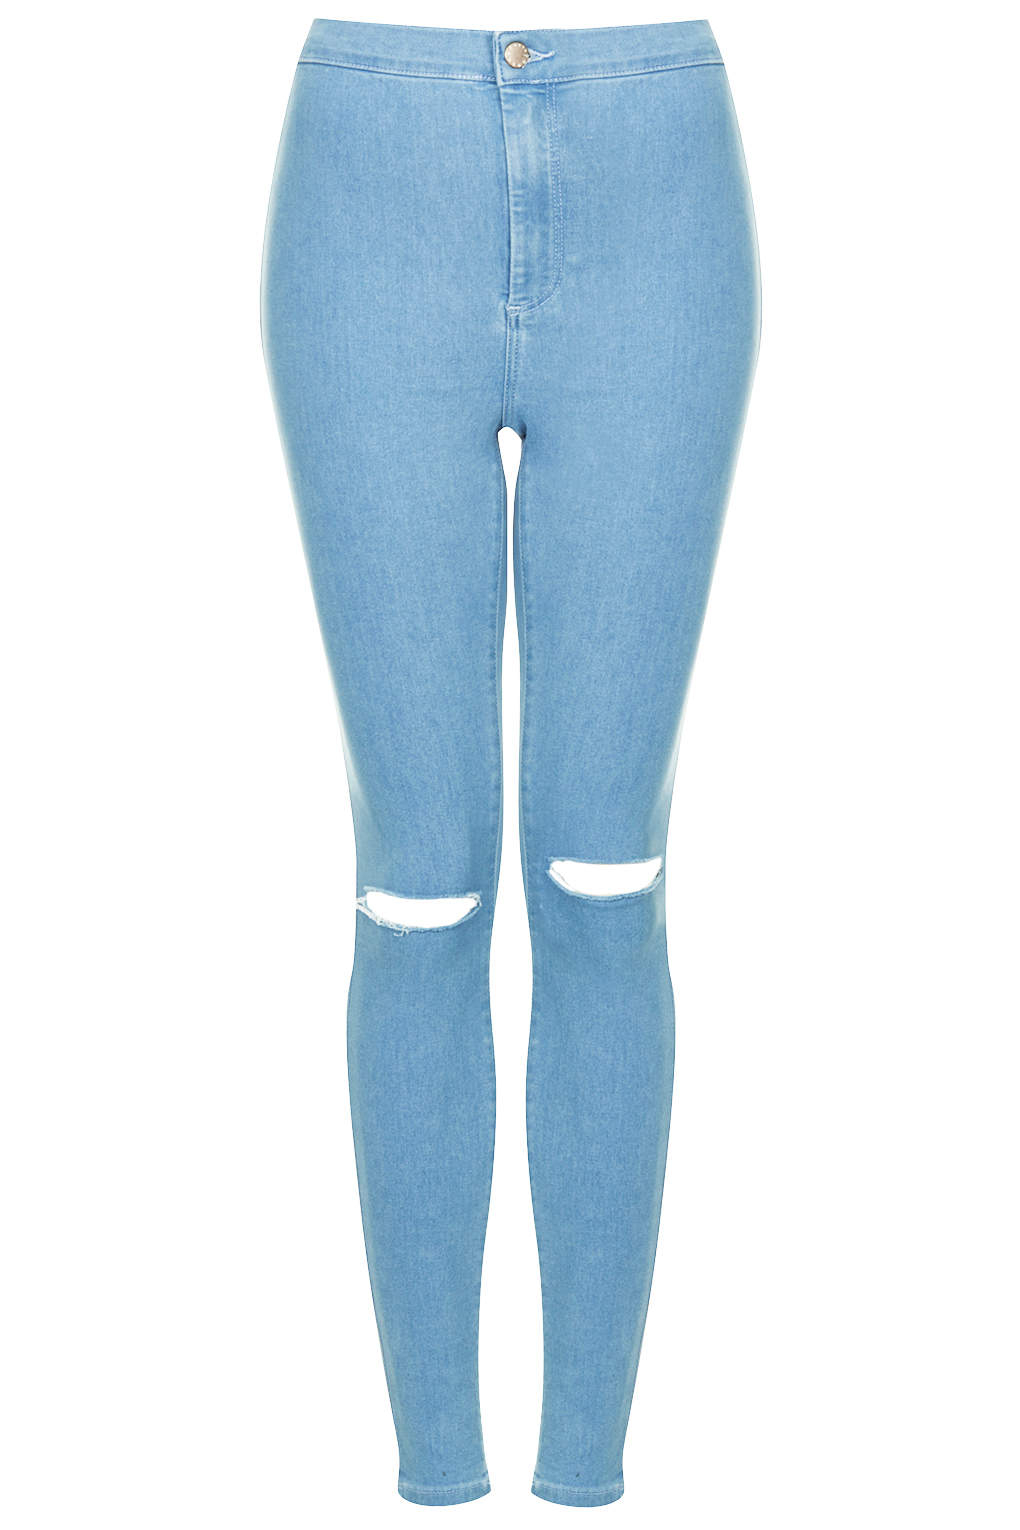 Topshop Moto Bleached Ripped Joni Jeans in Blue | Lyst